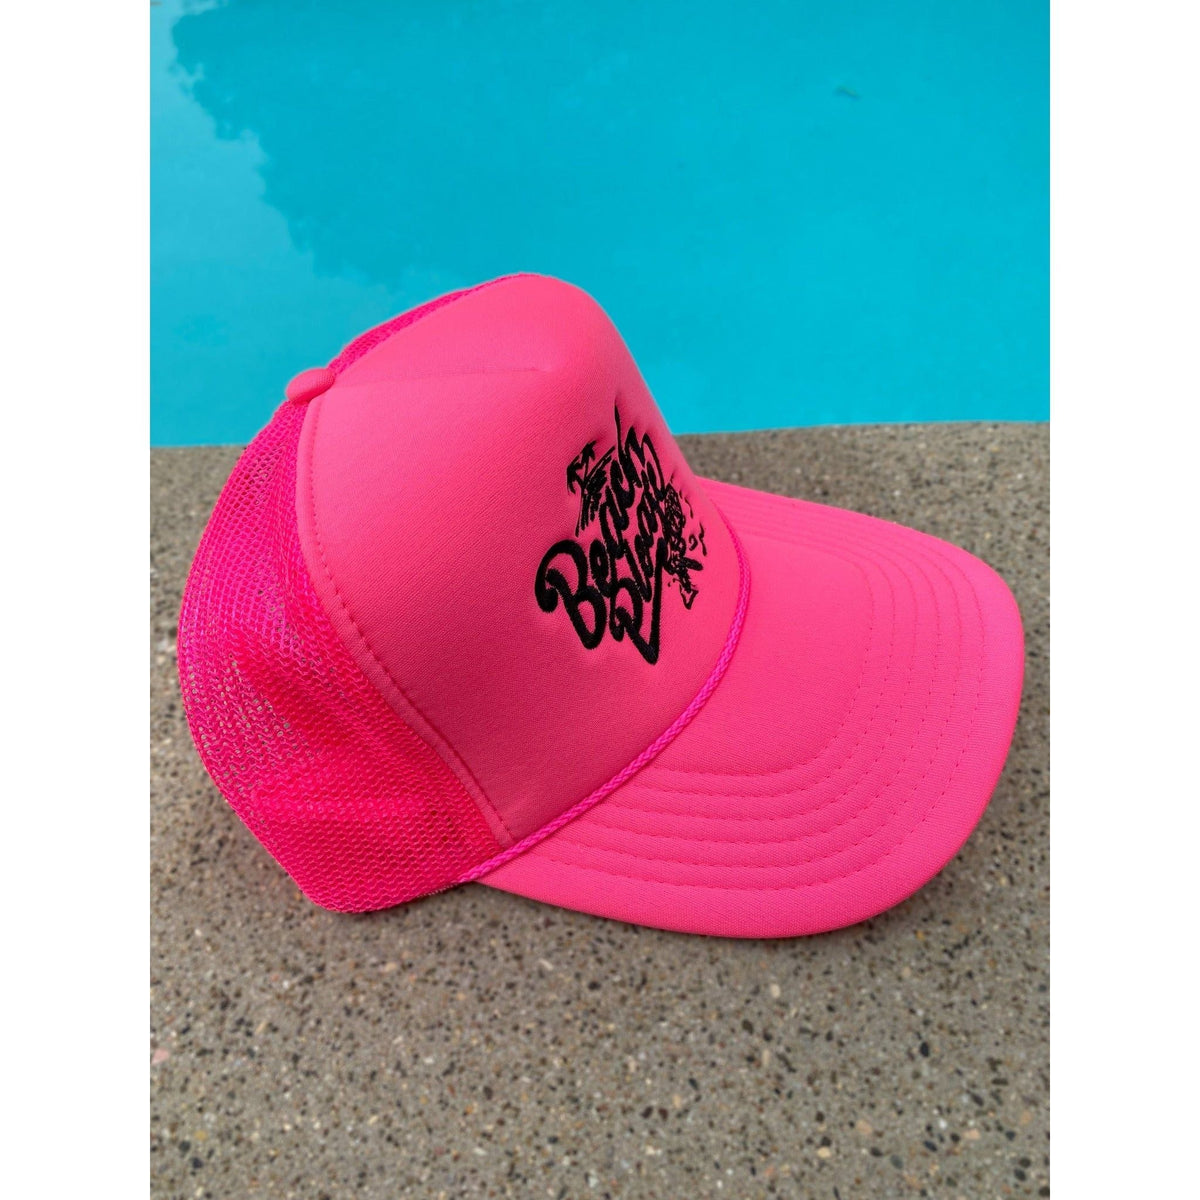 Beach Please | Black and Pink Trucker Hat by Haute Sheet Hats TheFringeCultureCollective